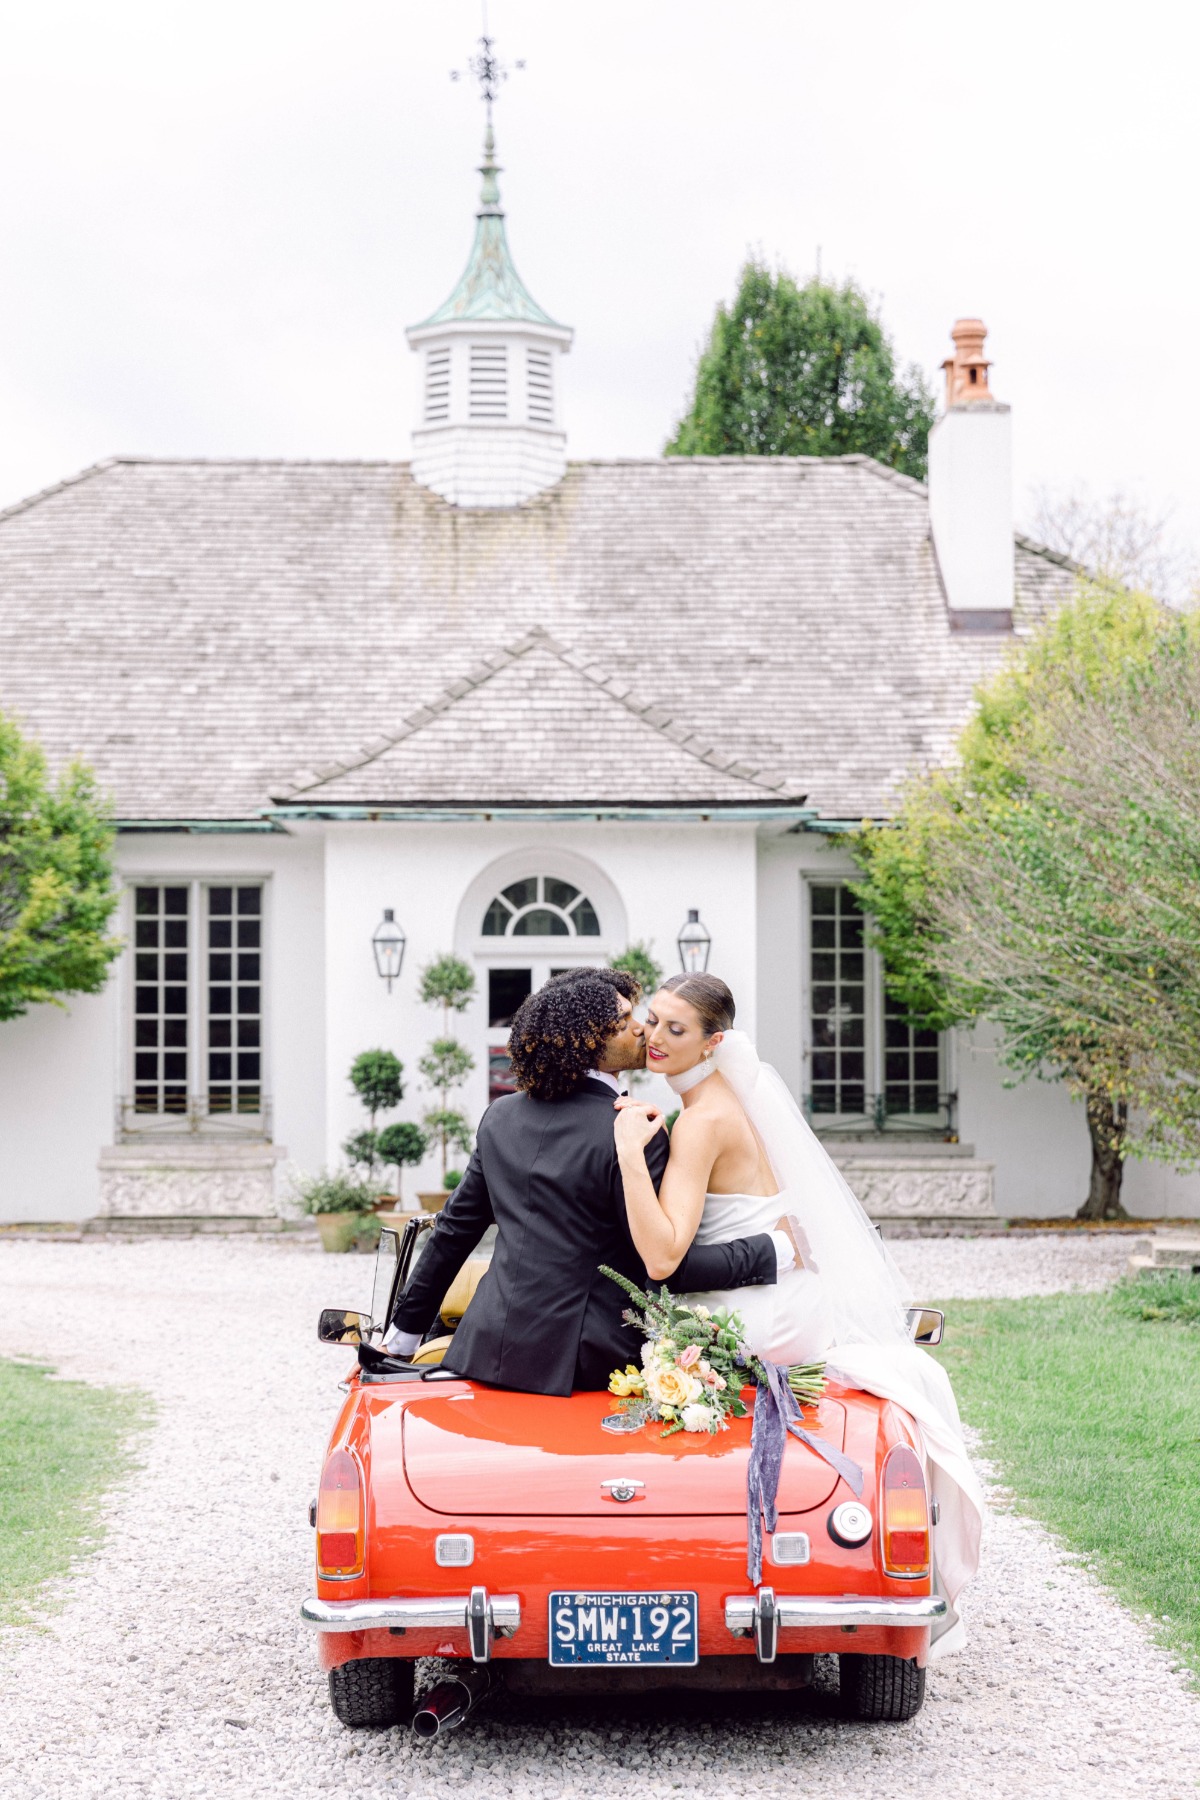 Why Renting An Estate For Your Wedding Is The Way To Go